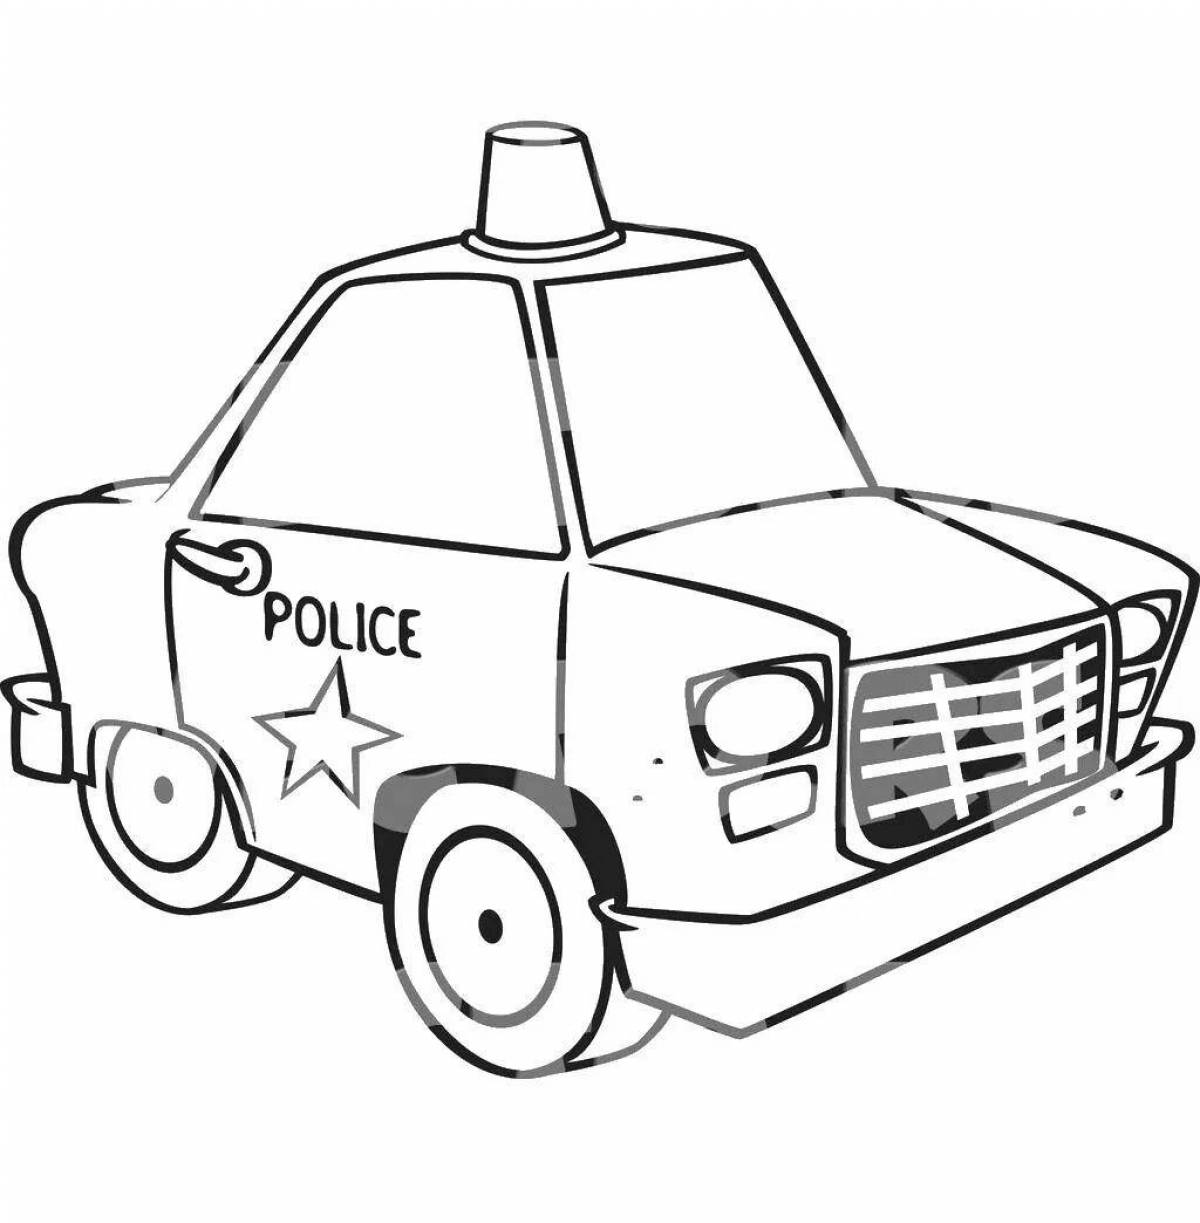 Adorable taxi coloring page for 3-4 year olds